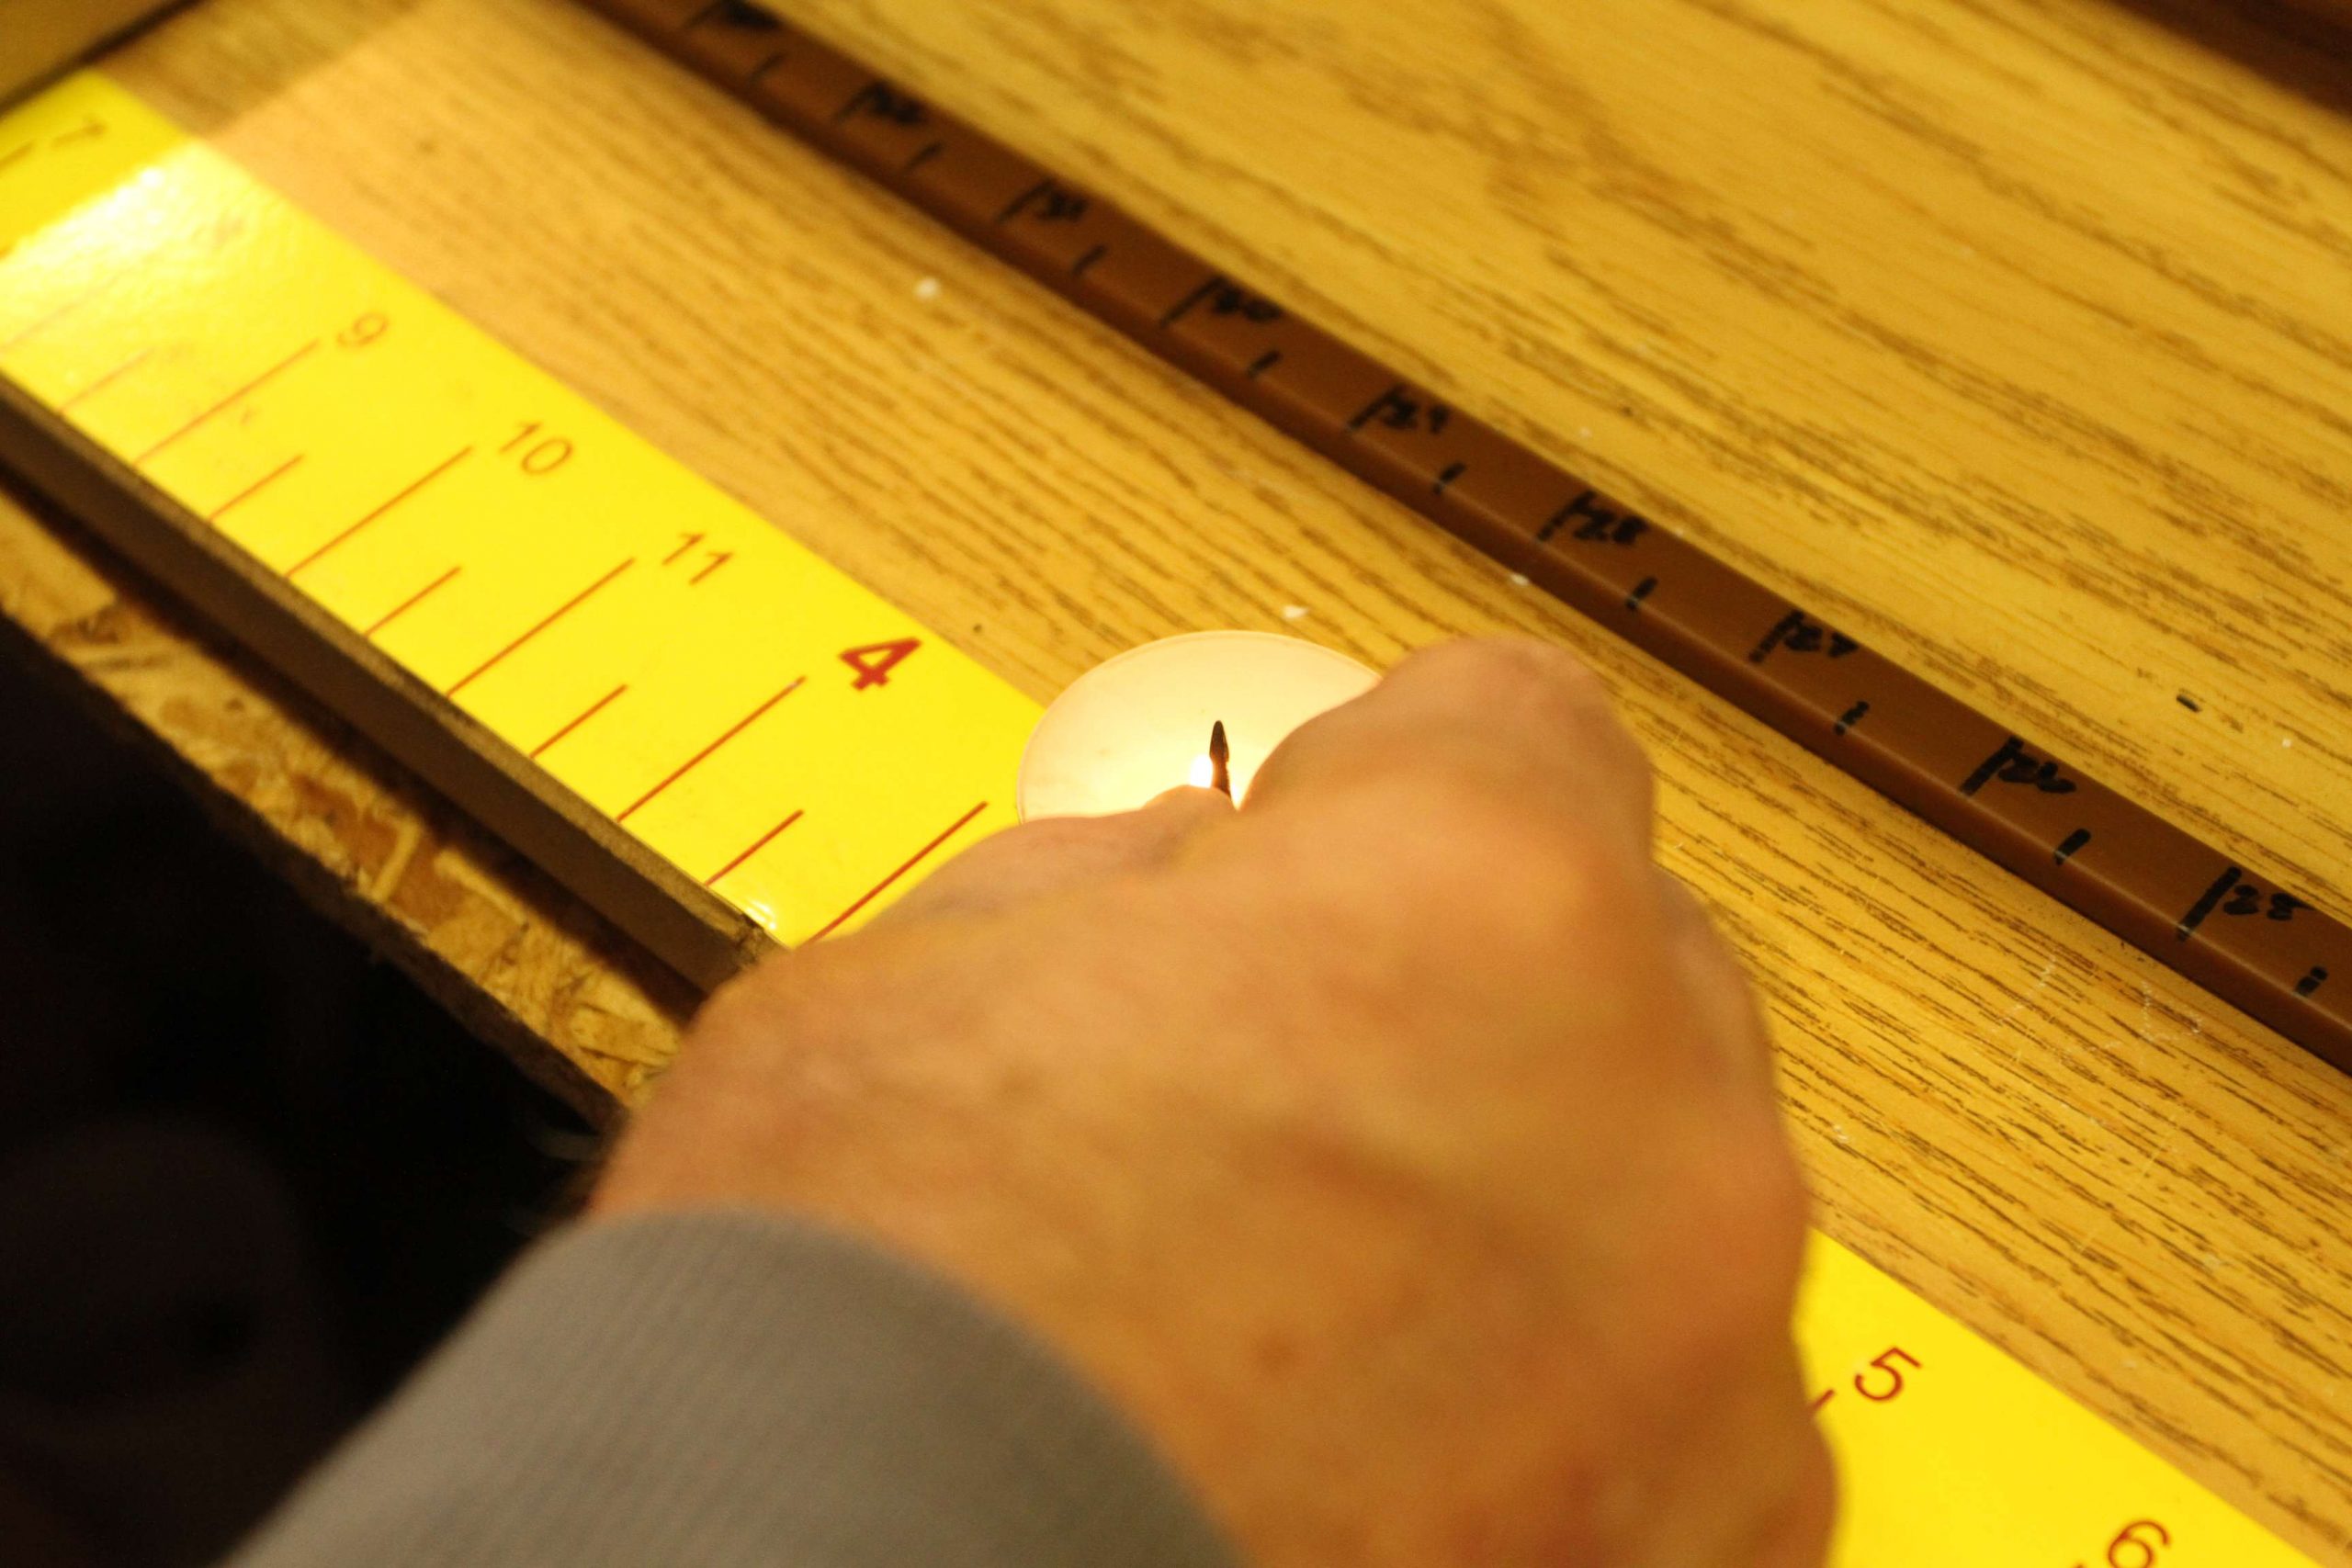 After he rod grip has cured for 24 hours, he begins the tying process. Dobbins uses hot glue to attach each guide at a previously marked location along the blank's spline. A small candle is lit, and he quickly heats the line guide in the flame before touching it to a glue stick that sits directly above the wrapping machine. 